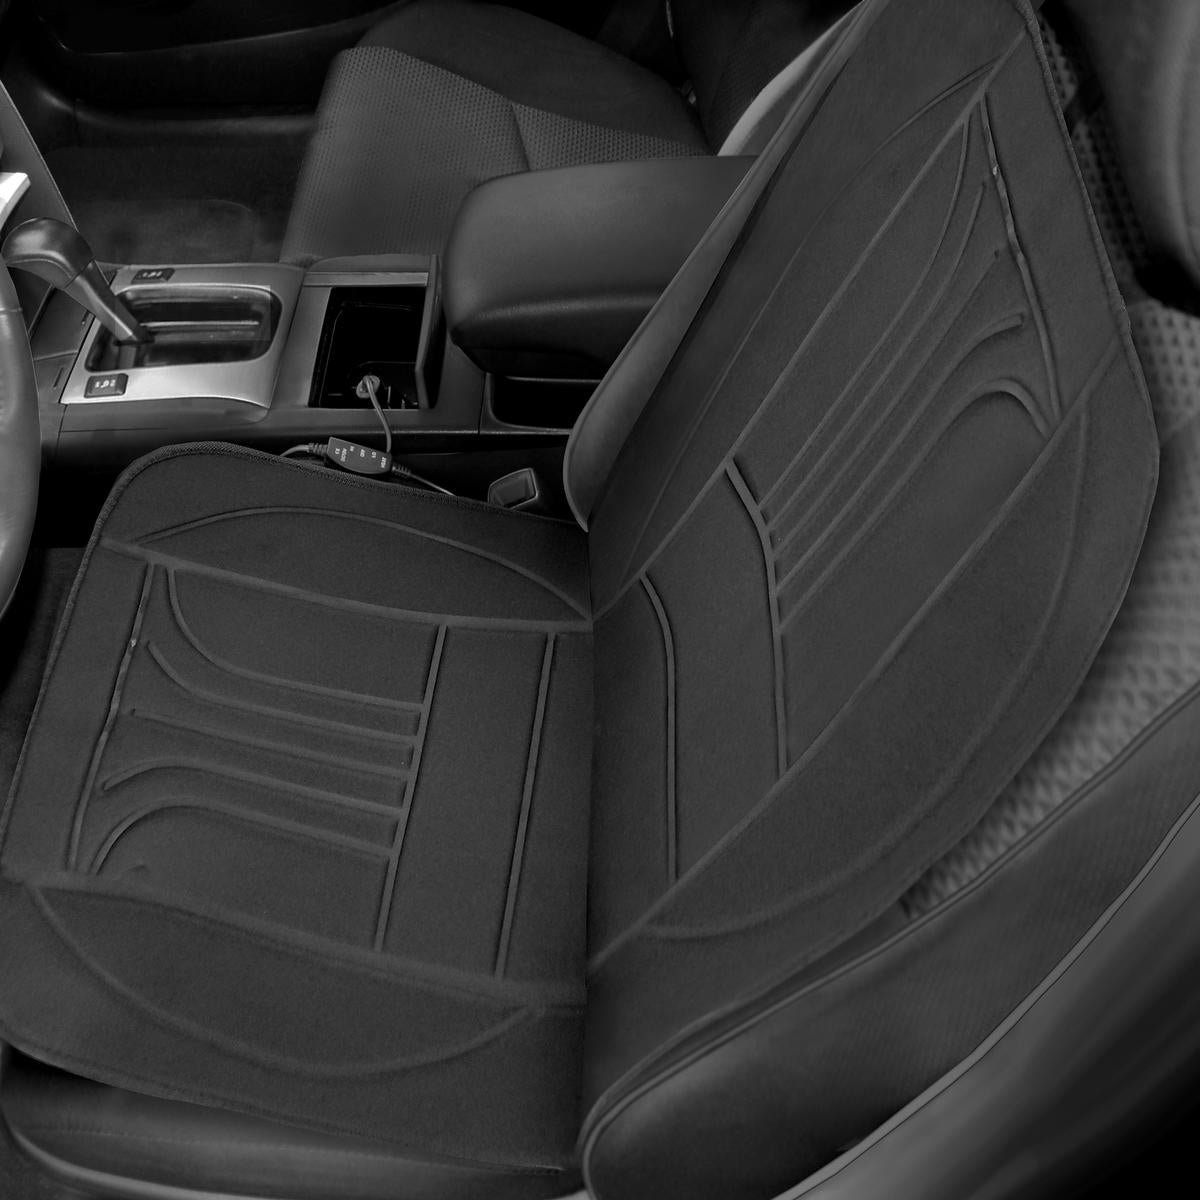 Heated Seat Cover Longer PU Leather Seat Cushion with Fast Heat to